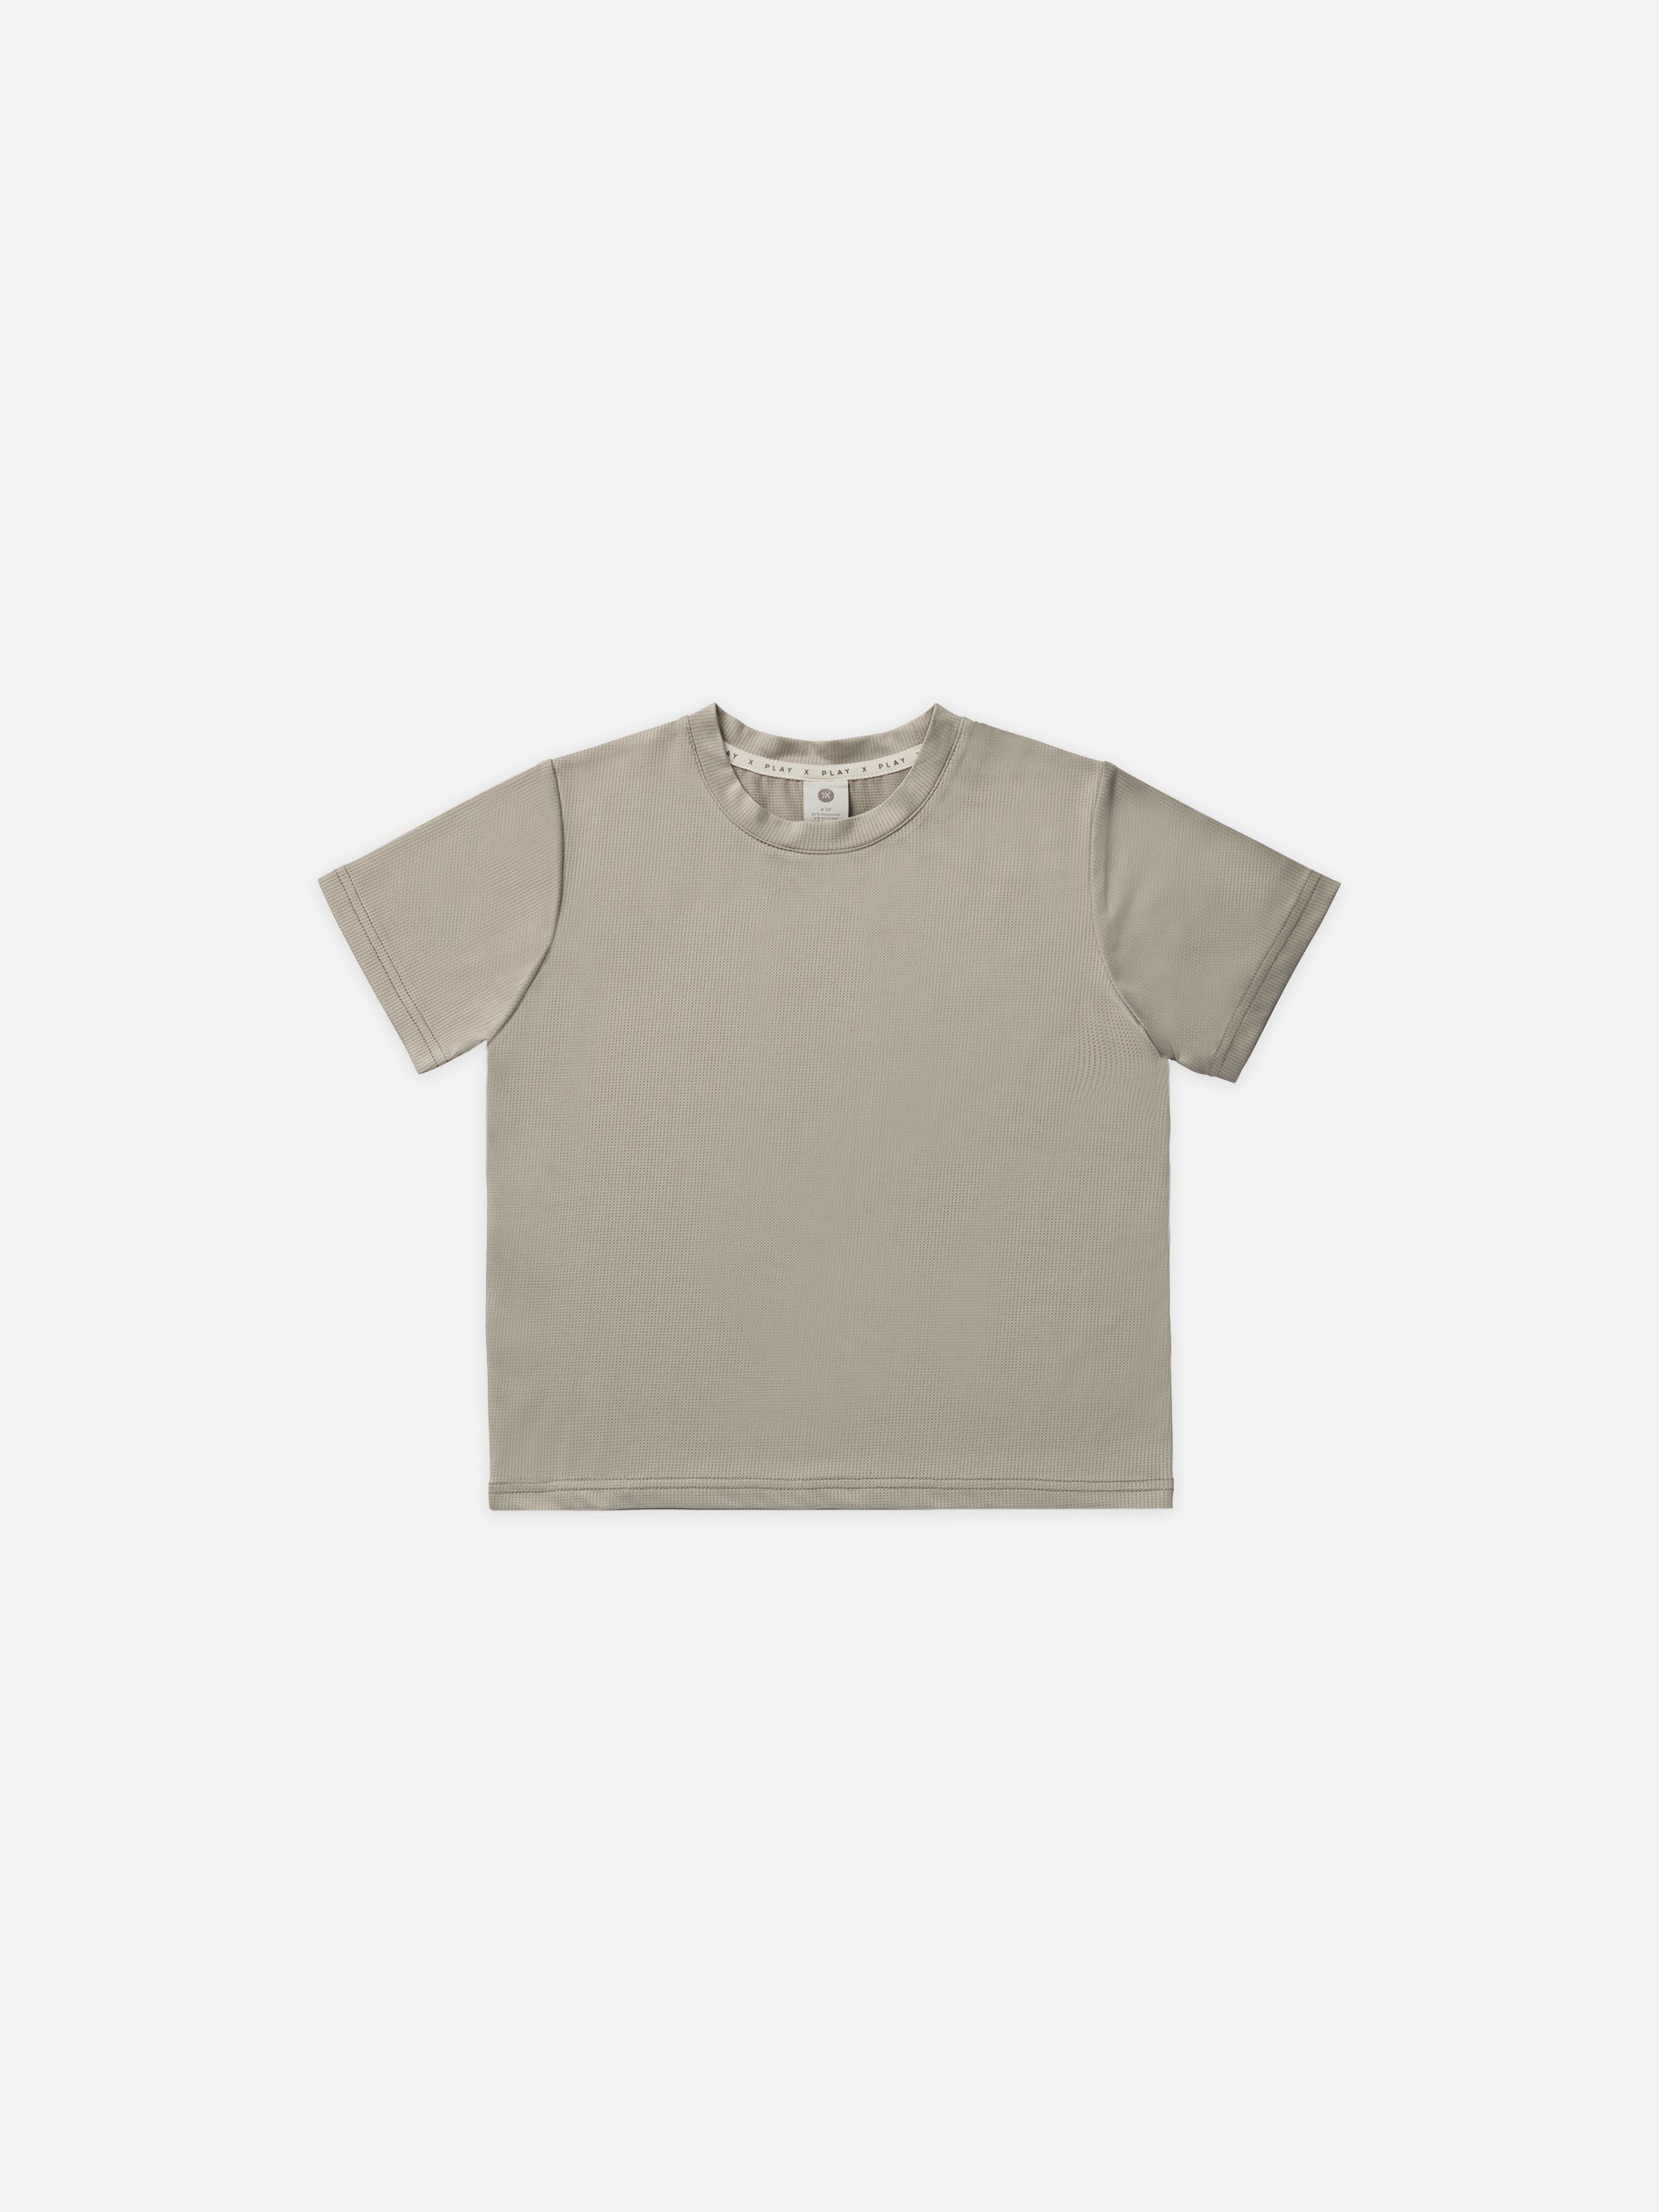 Training Tee || Sage - Rylee + Cru | Kids Clothes | Trendy Baby Clothes | Modern Infant Outfits |